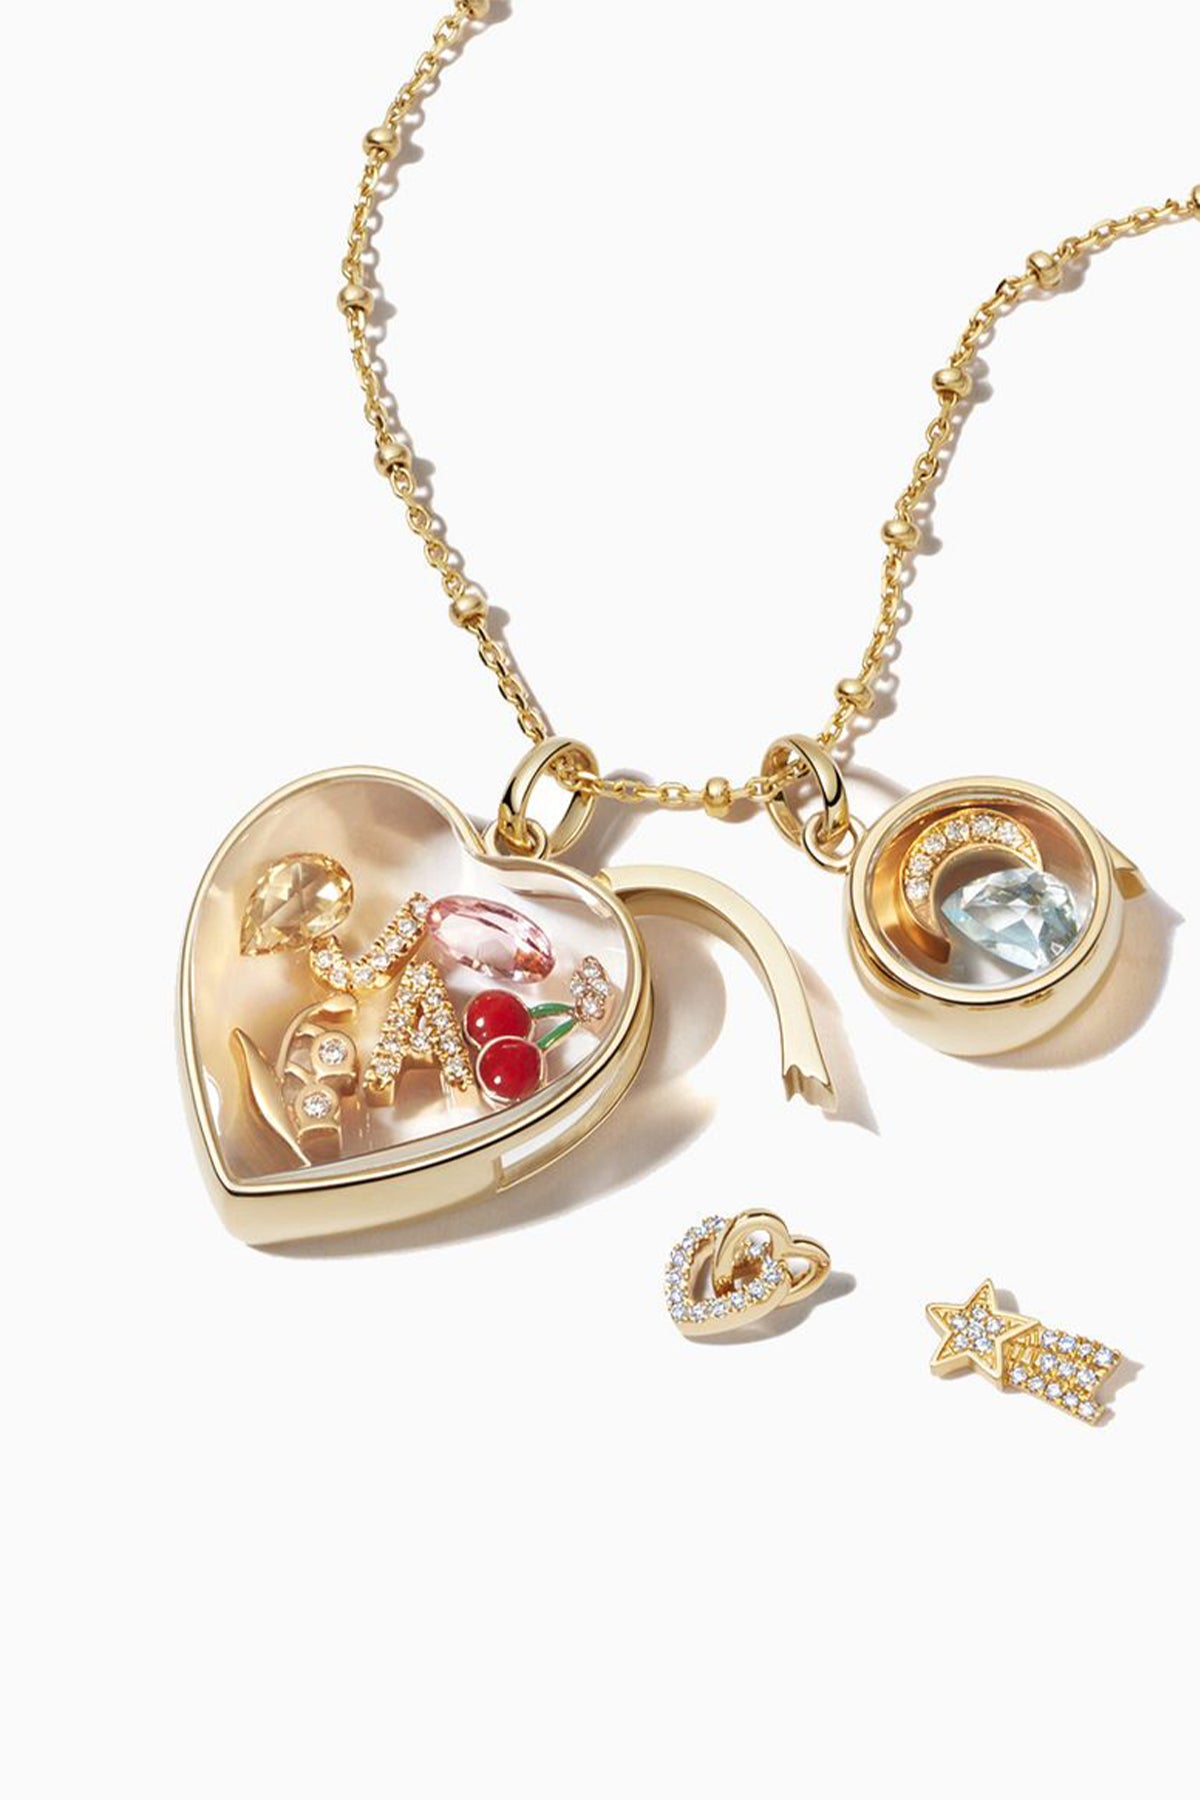 LOQUET LONDON | LINKED HEARTS CHARM